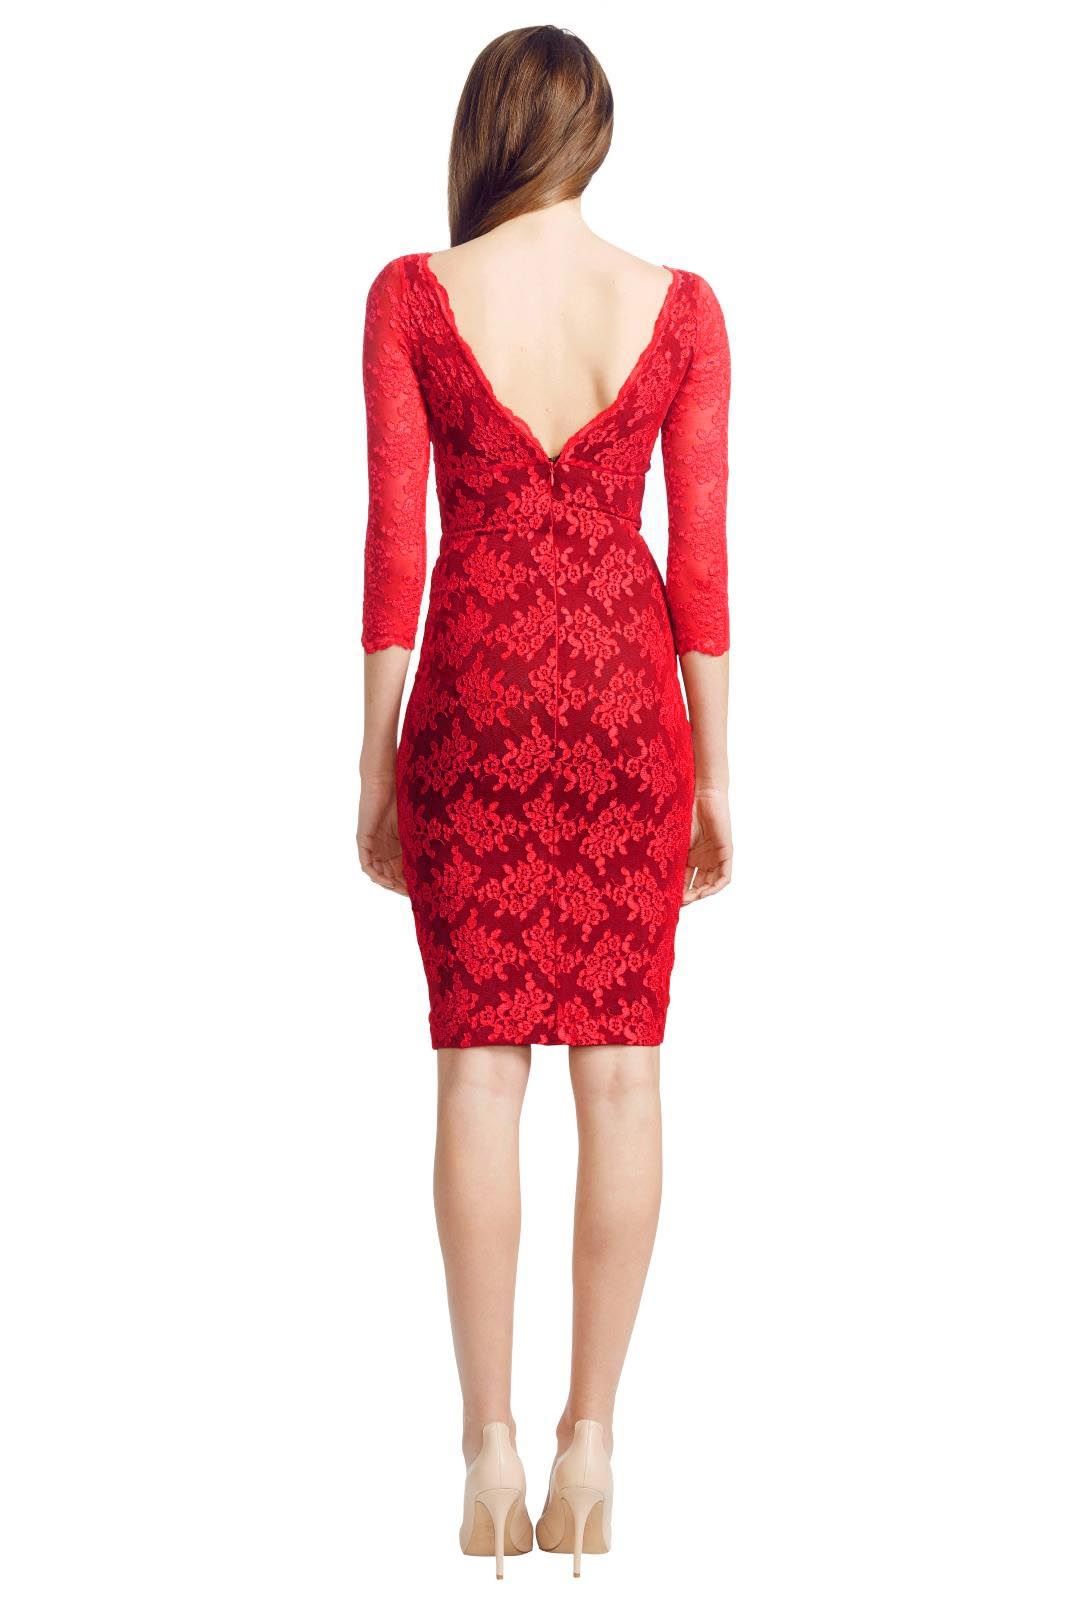 Wheels and Dollbaby - Red Scallop Lace FiFi Dress - Red - Back